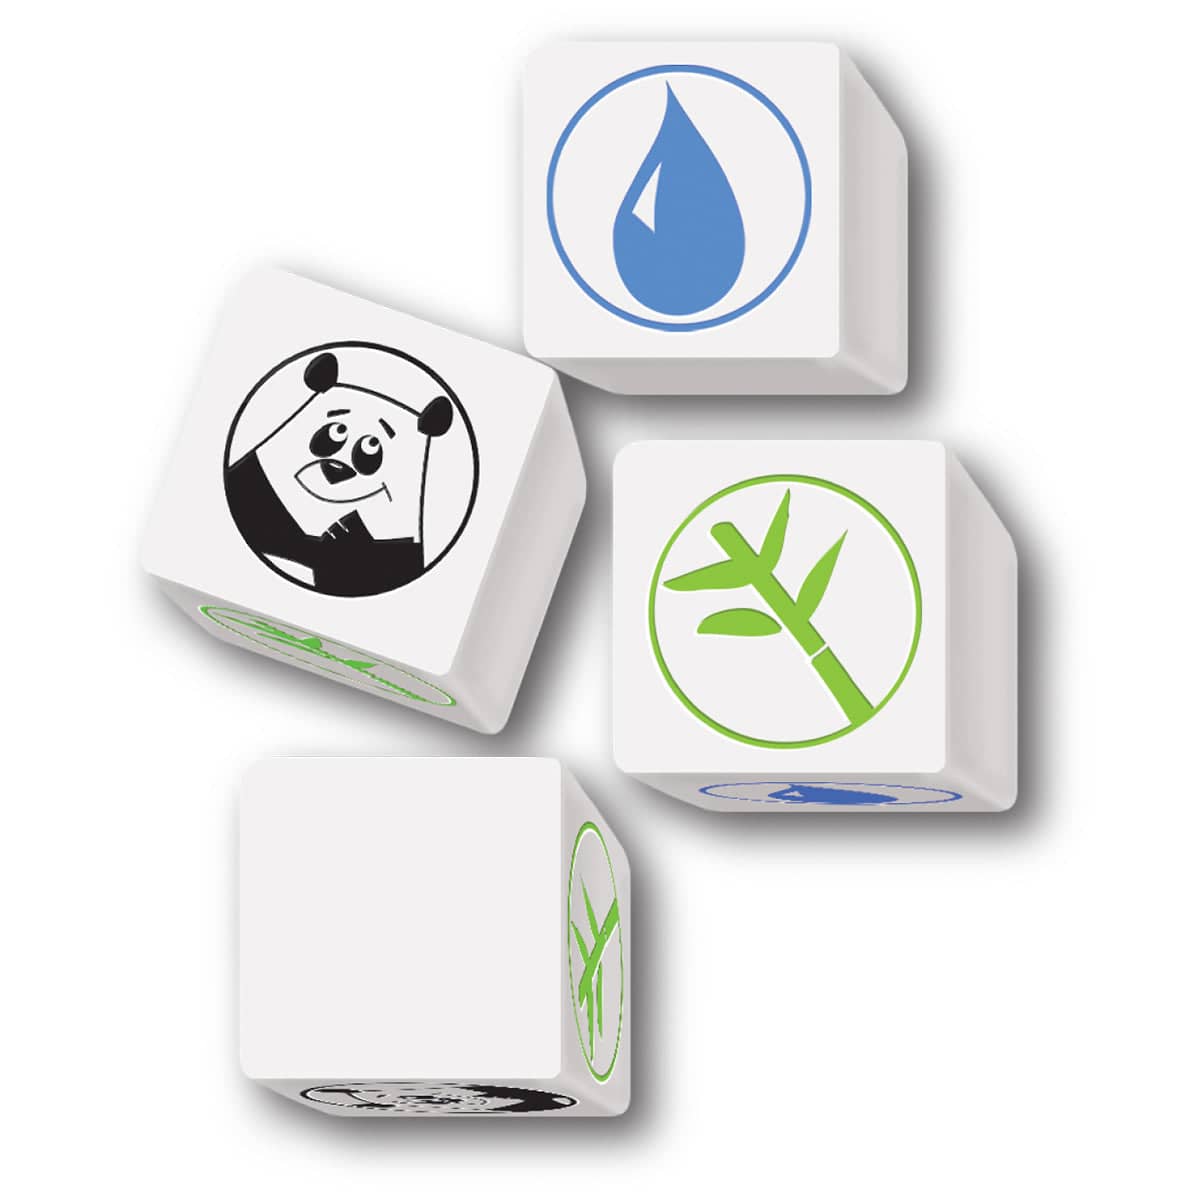 Pass the Pandas | Dice Game for Ages 6 and Up | Ultra PRO Entertainment